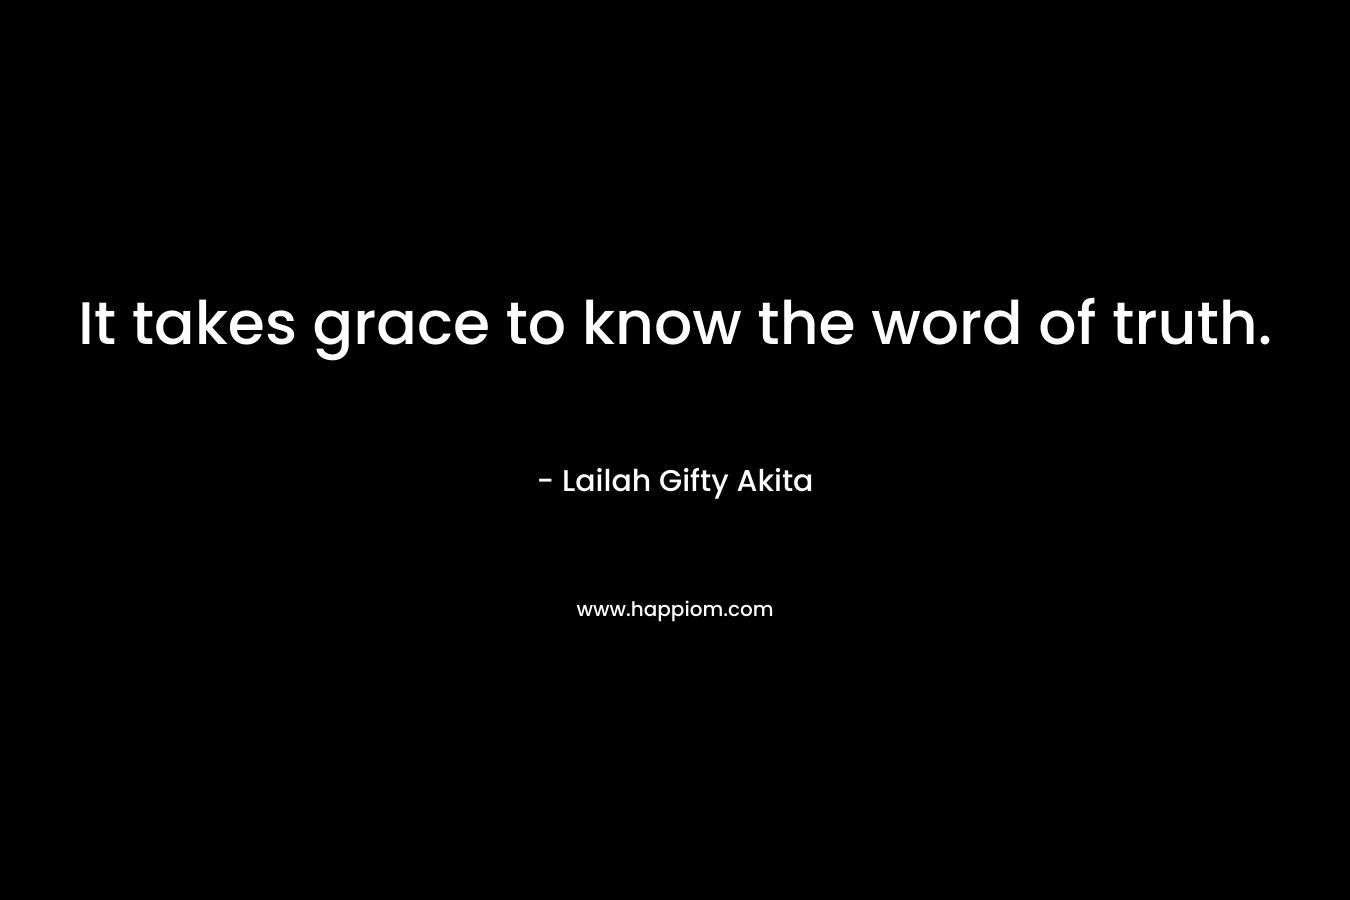 It takes grace to know the word of truth.